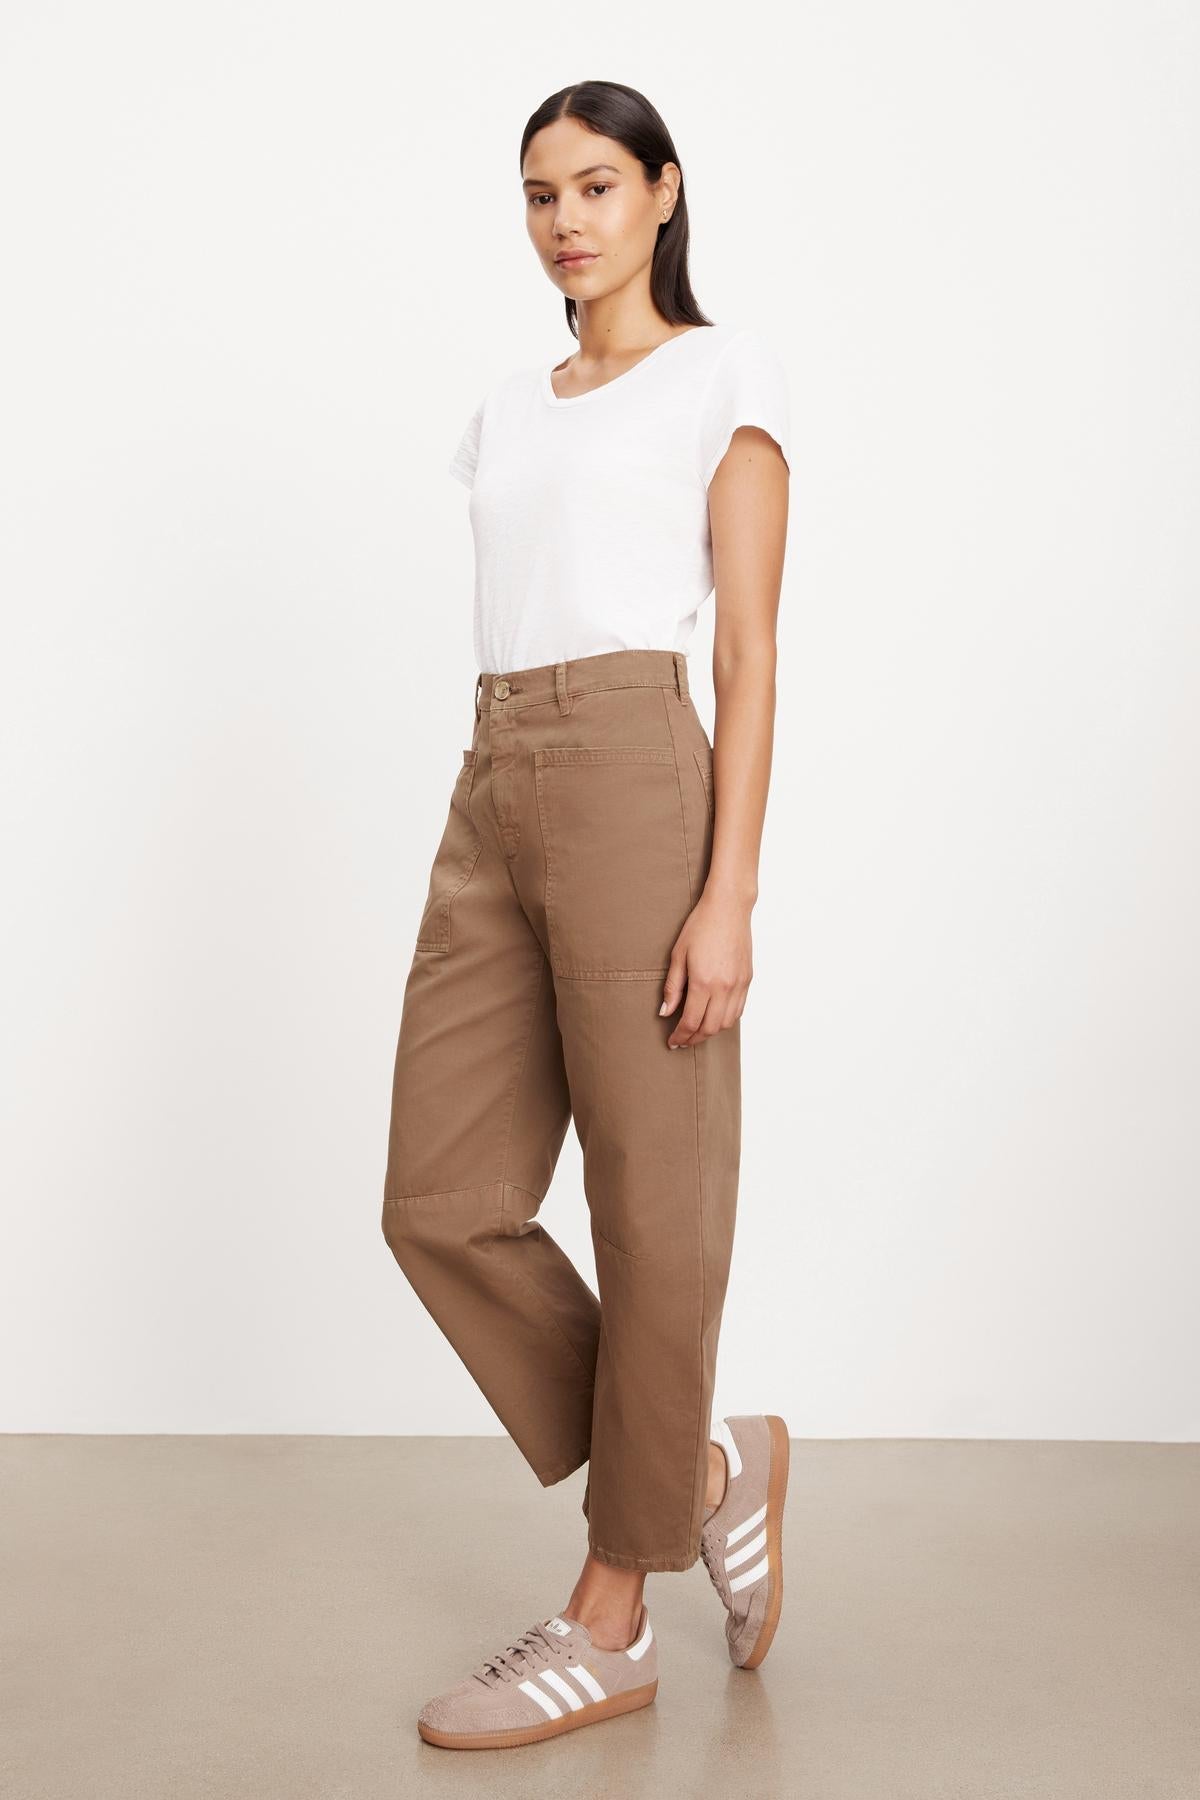   The model is wearing a white t-shirt and Velvet by Graham & Spencer BRYLIE SANDED TWILL UTILITY PANT with patch pockets. 